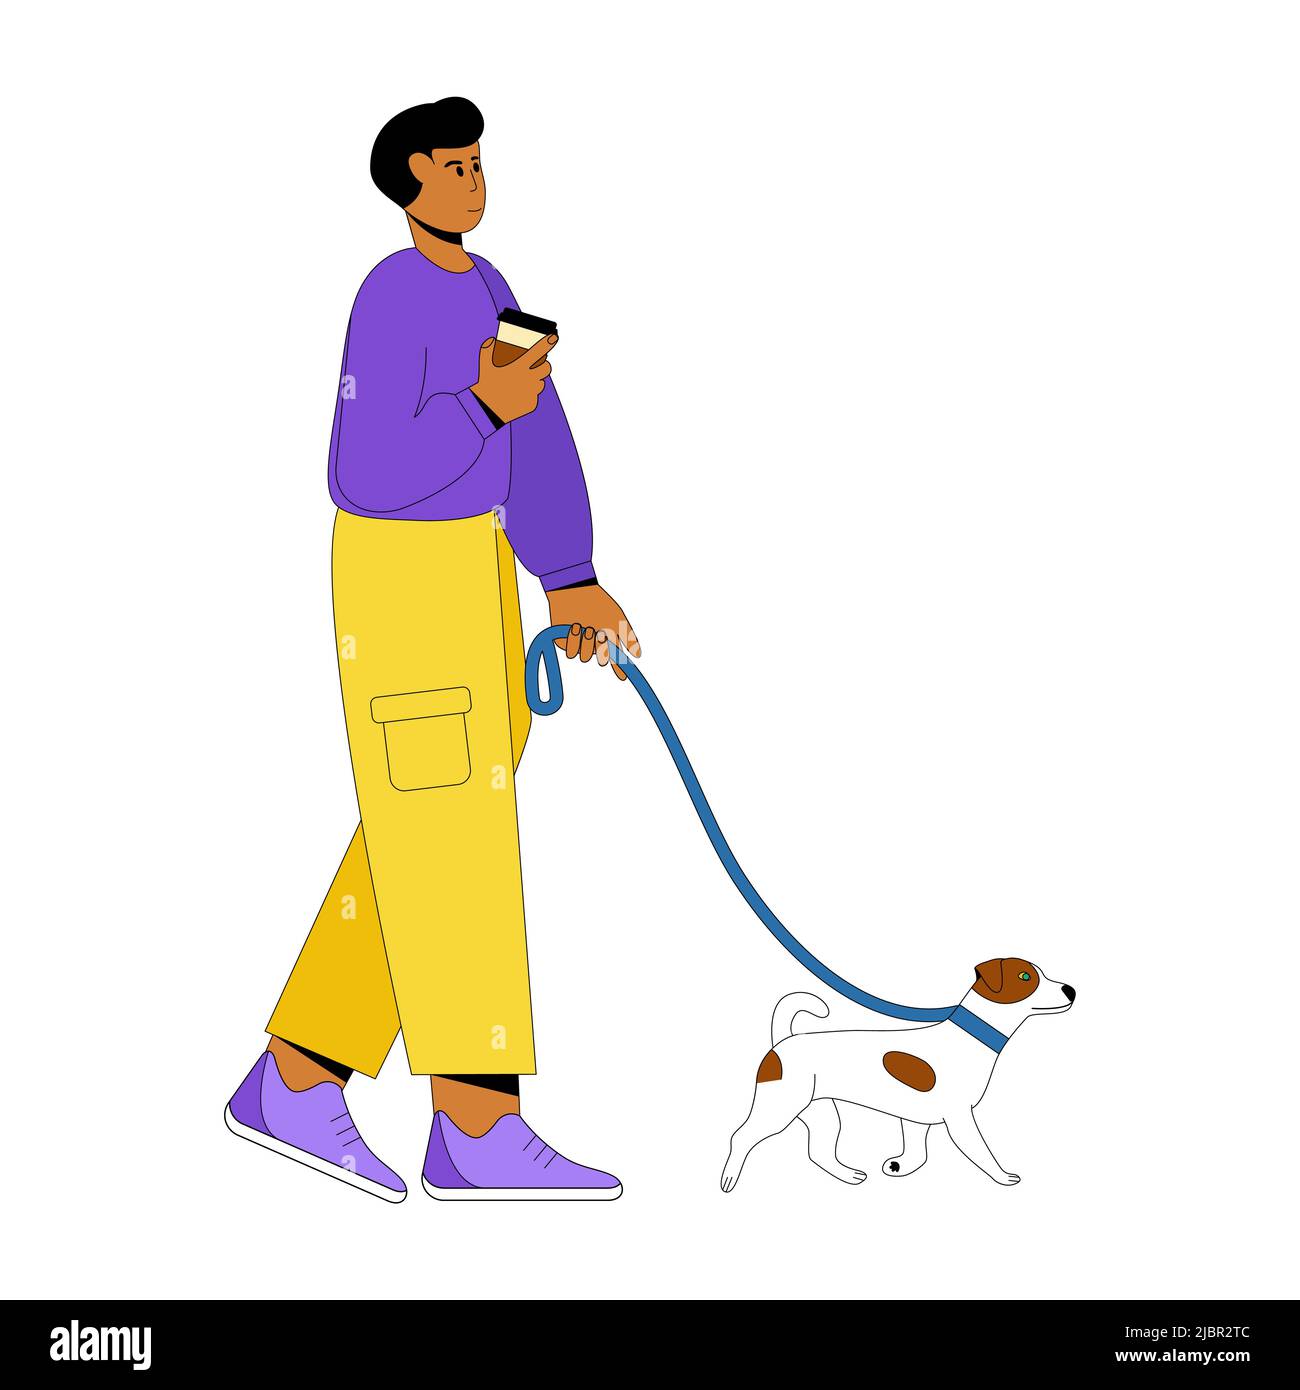 Man walking with a dog. Professional dog walking. Flat vector illustration isolated on white background Stock Vector